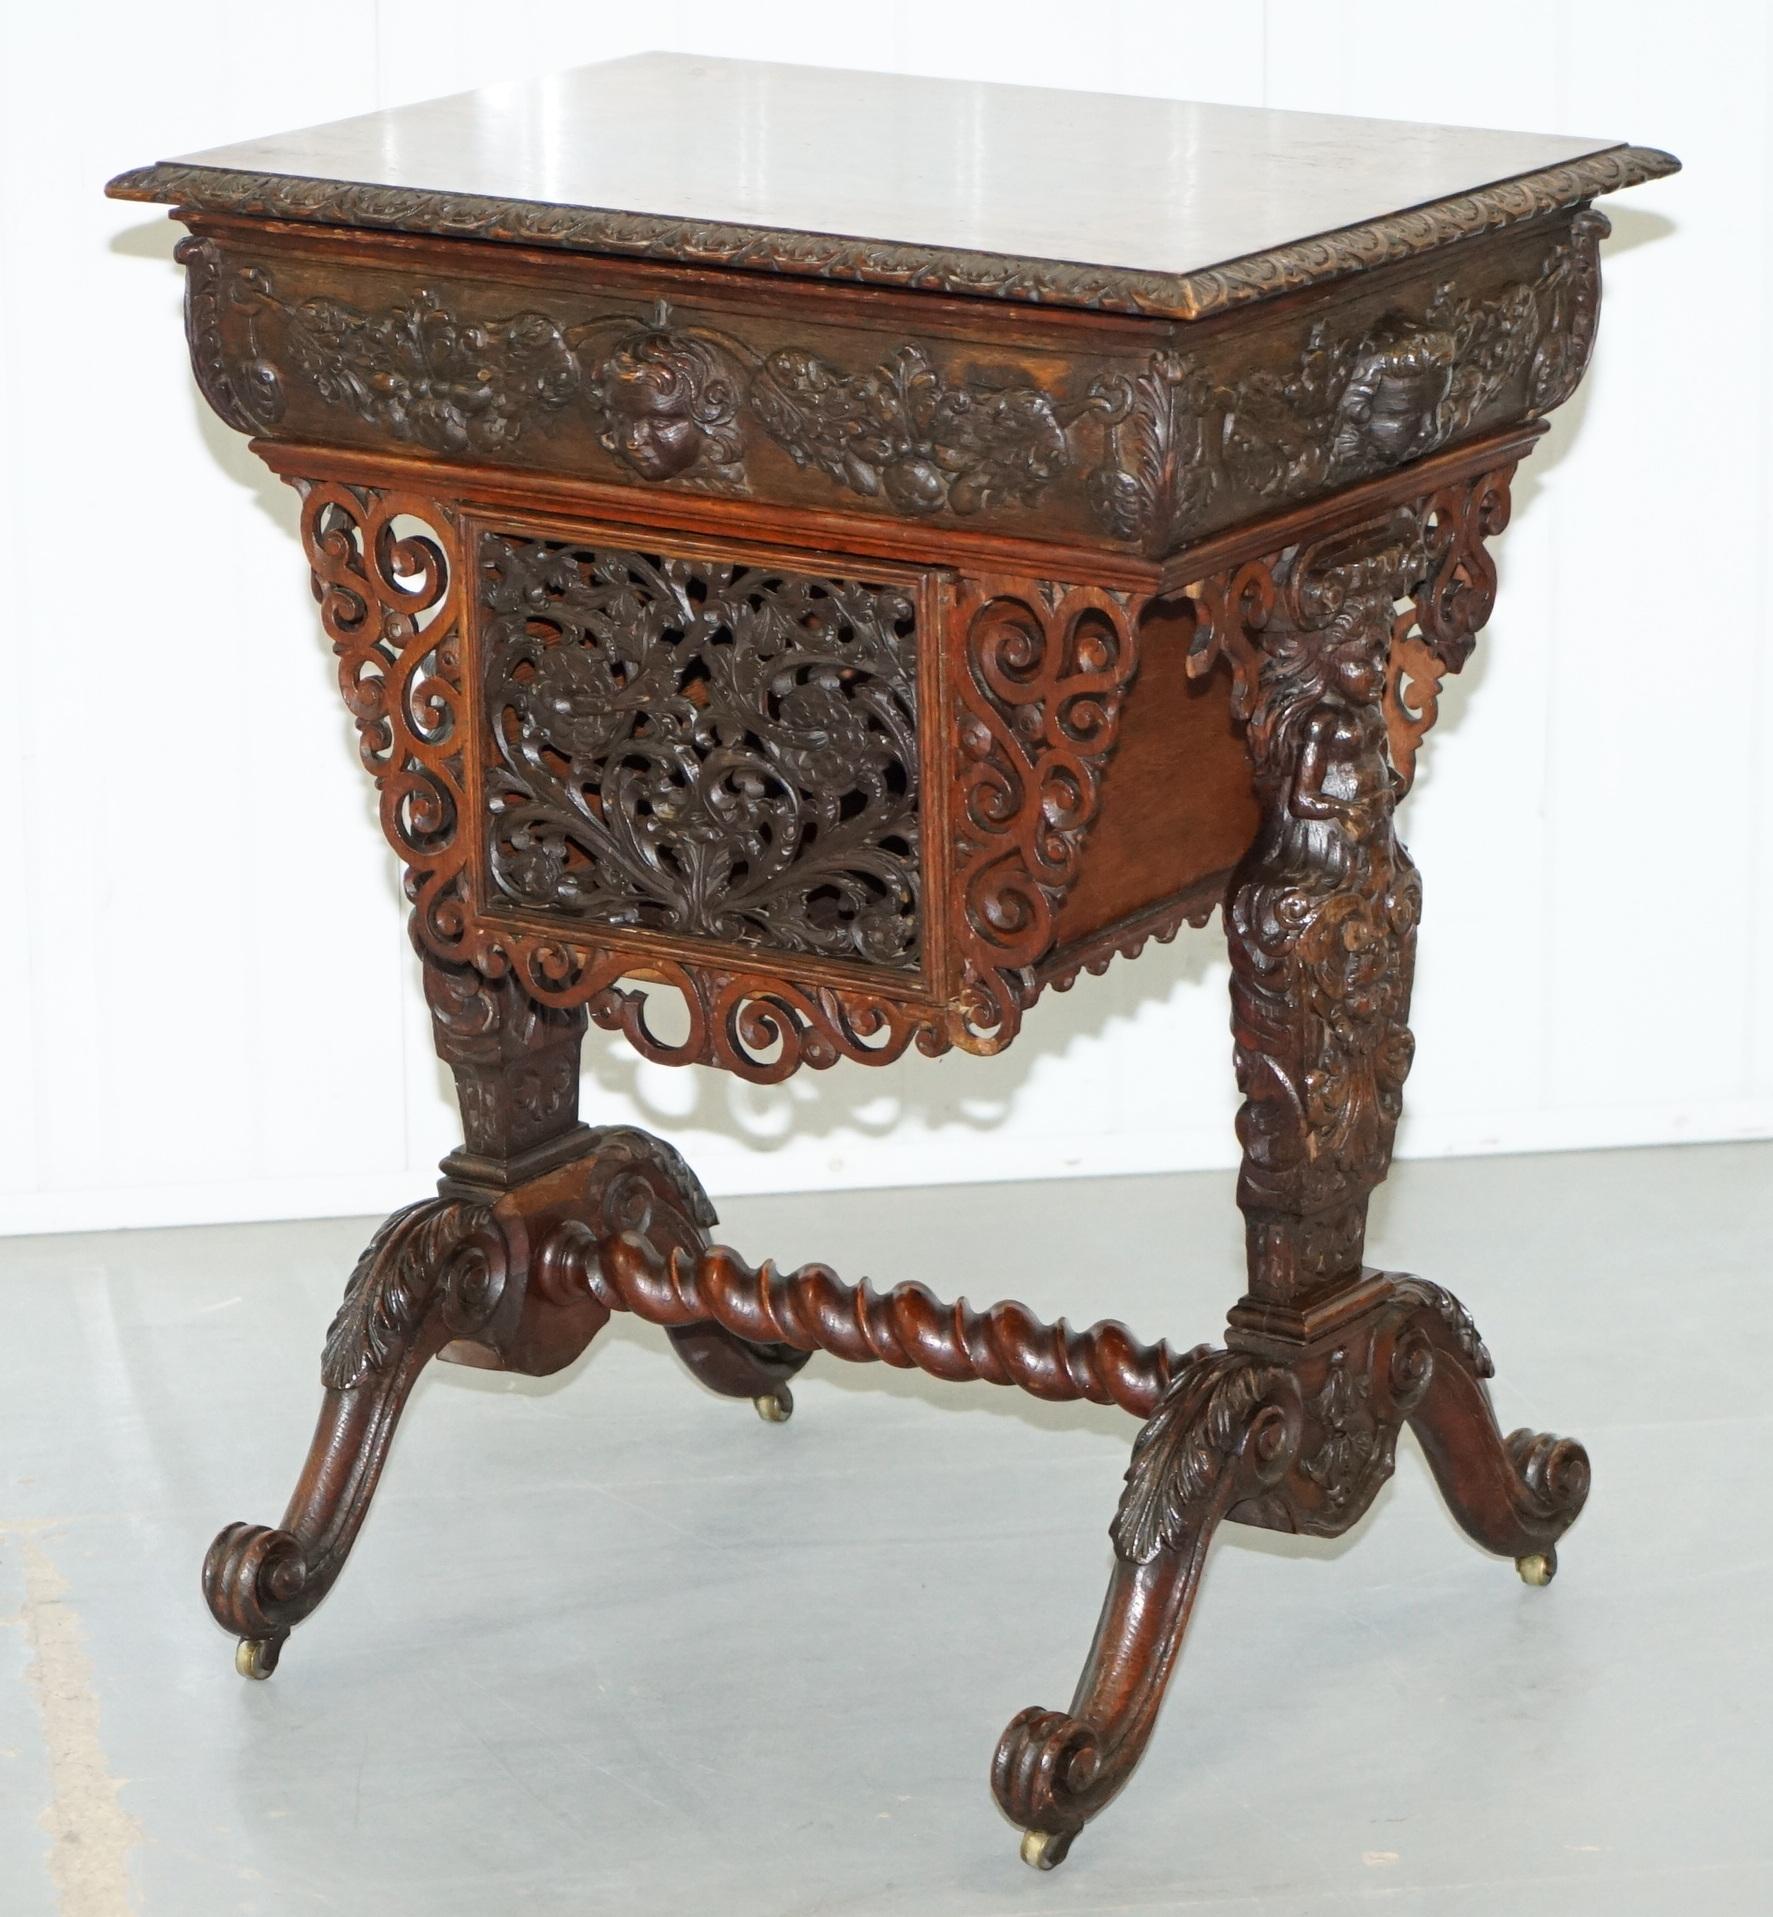 English Rare Hand Carved Solid Oak Victorian Sewing Table with Putti Angels 17th Century